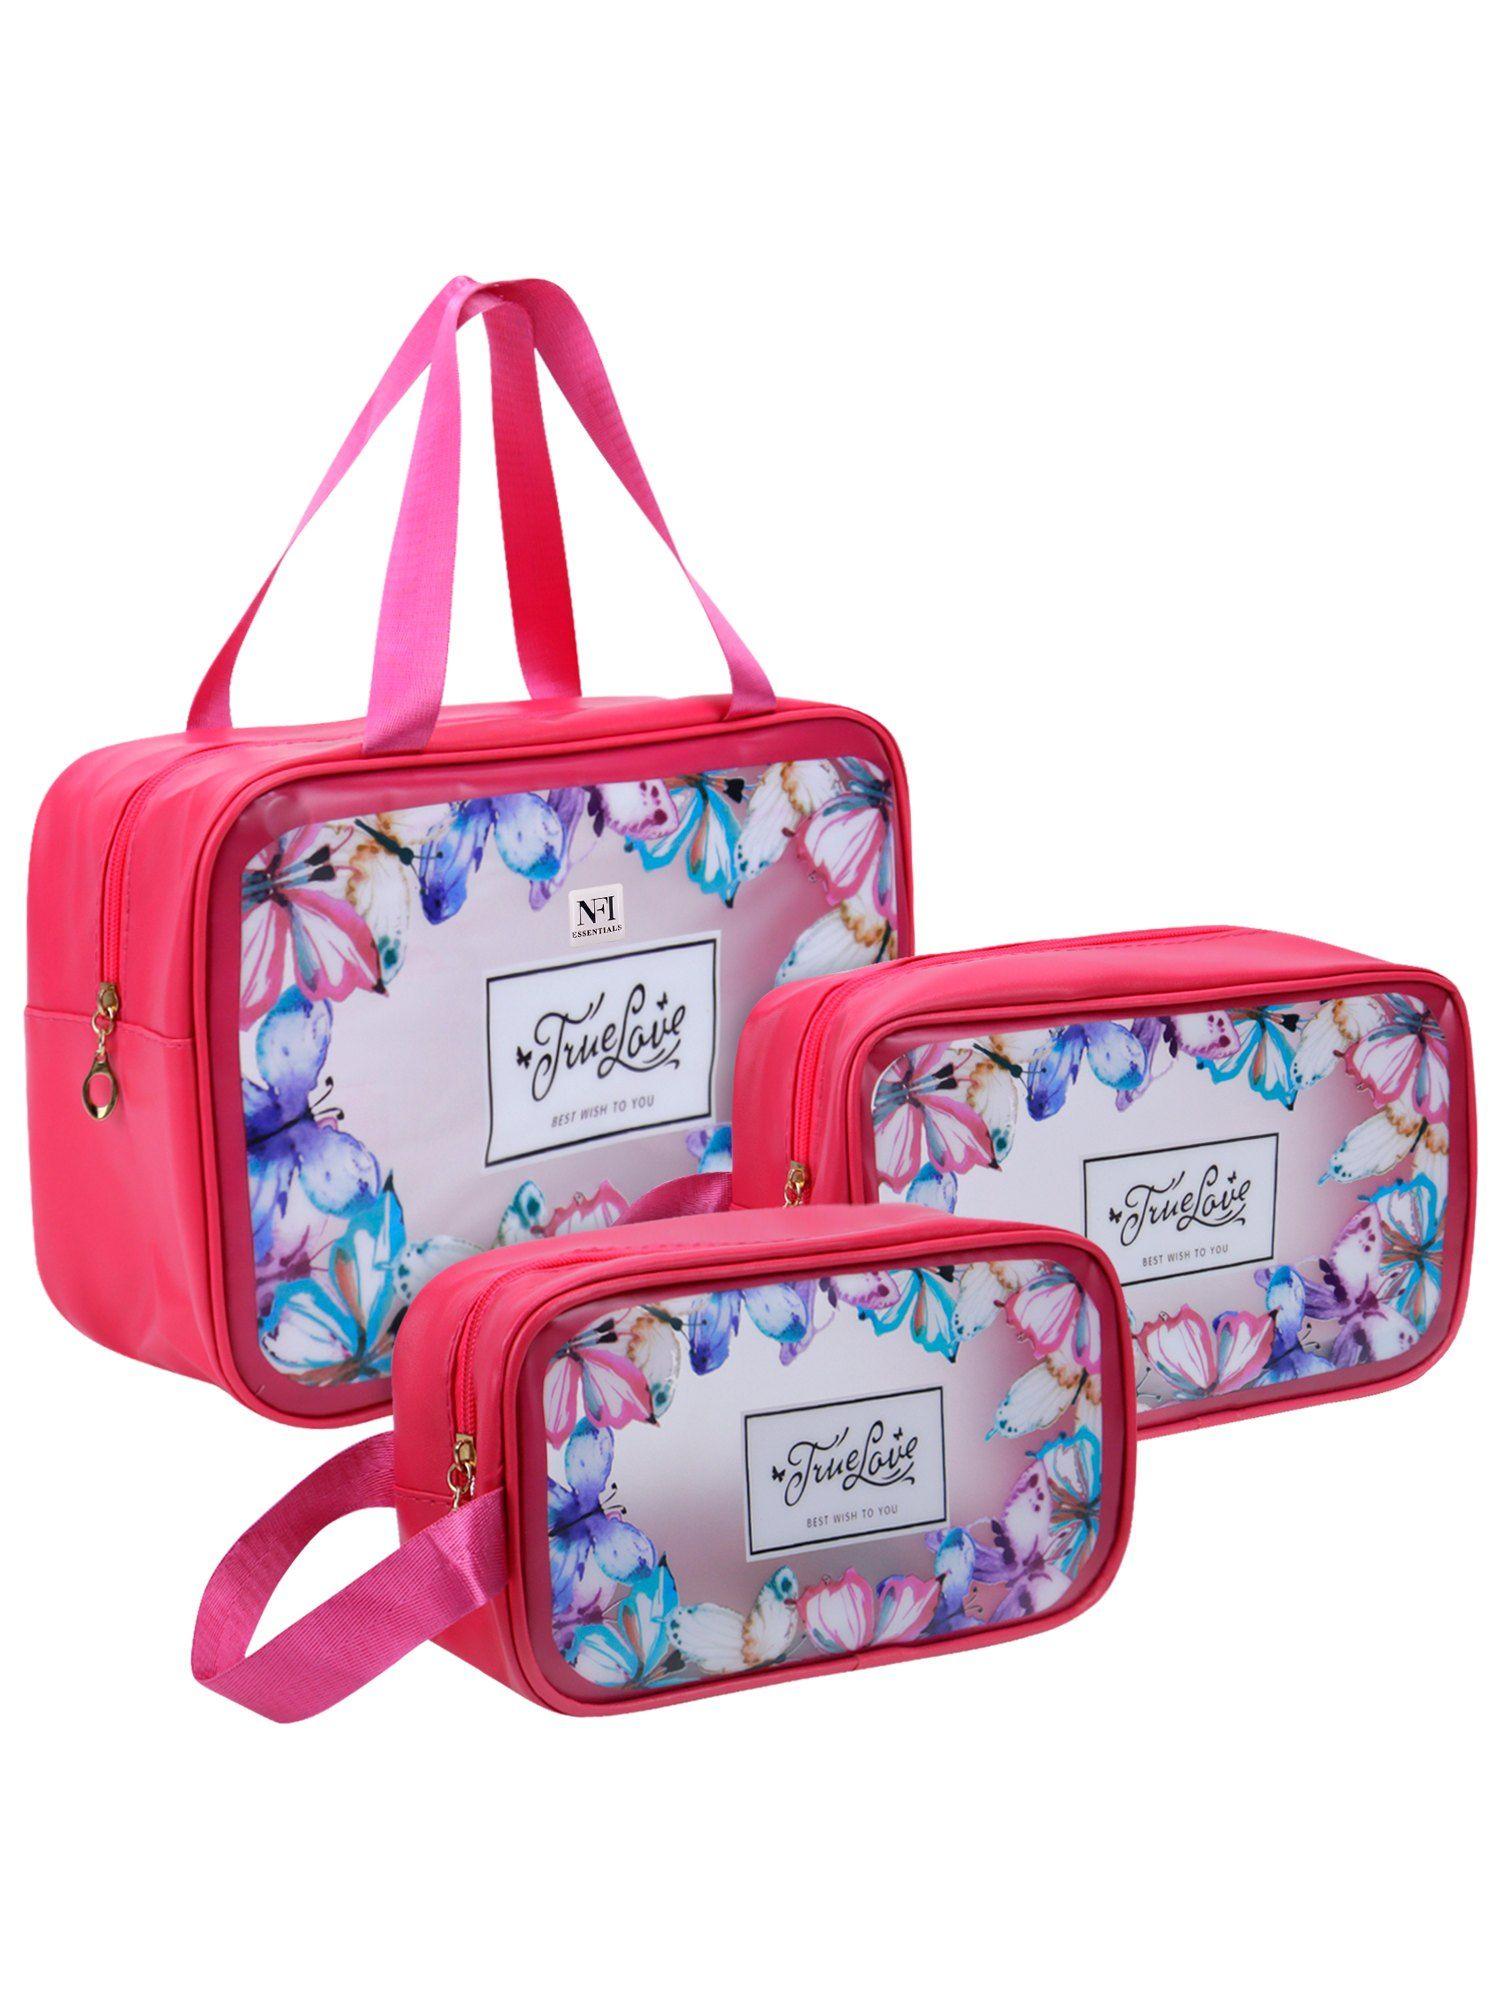 travel makeup pouch set of 3 washbag pouch transparent cosmetic bag pink